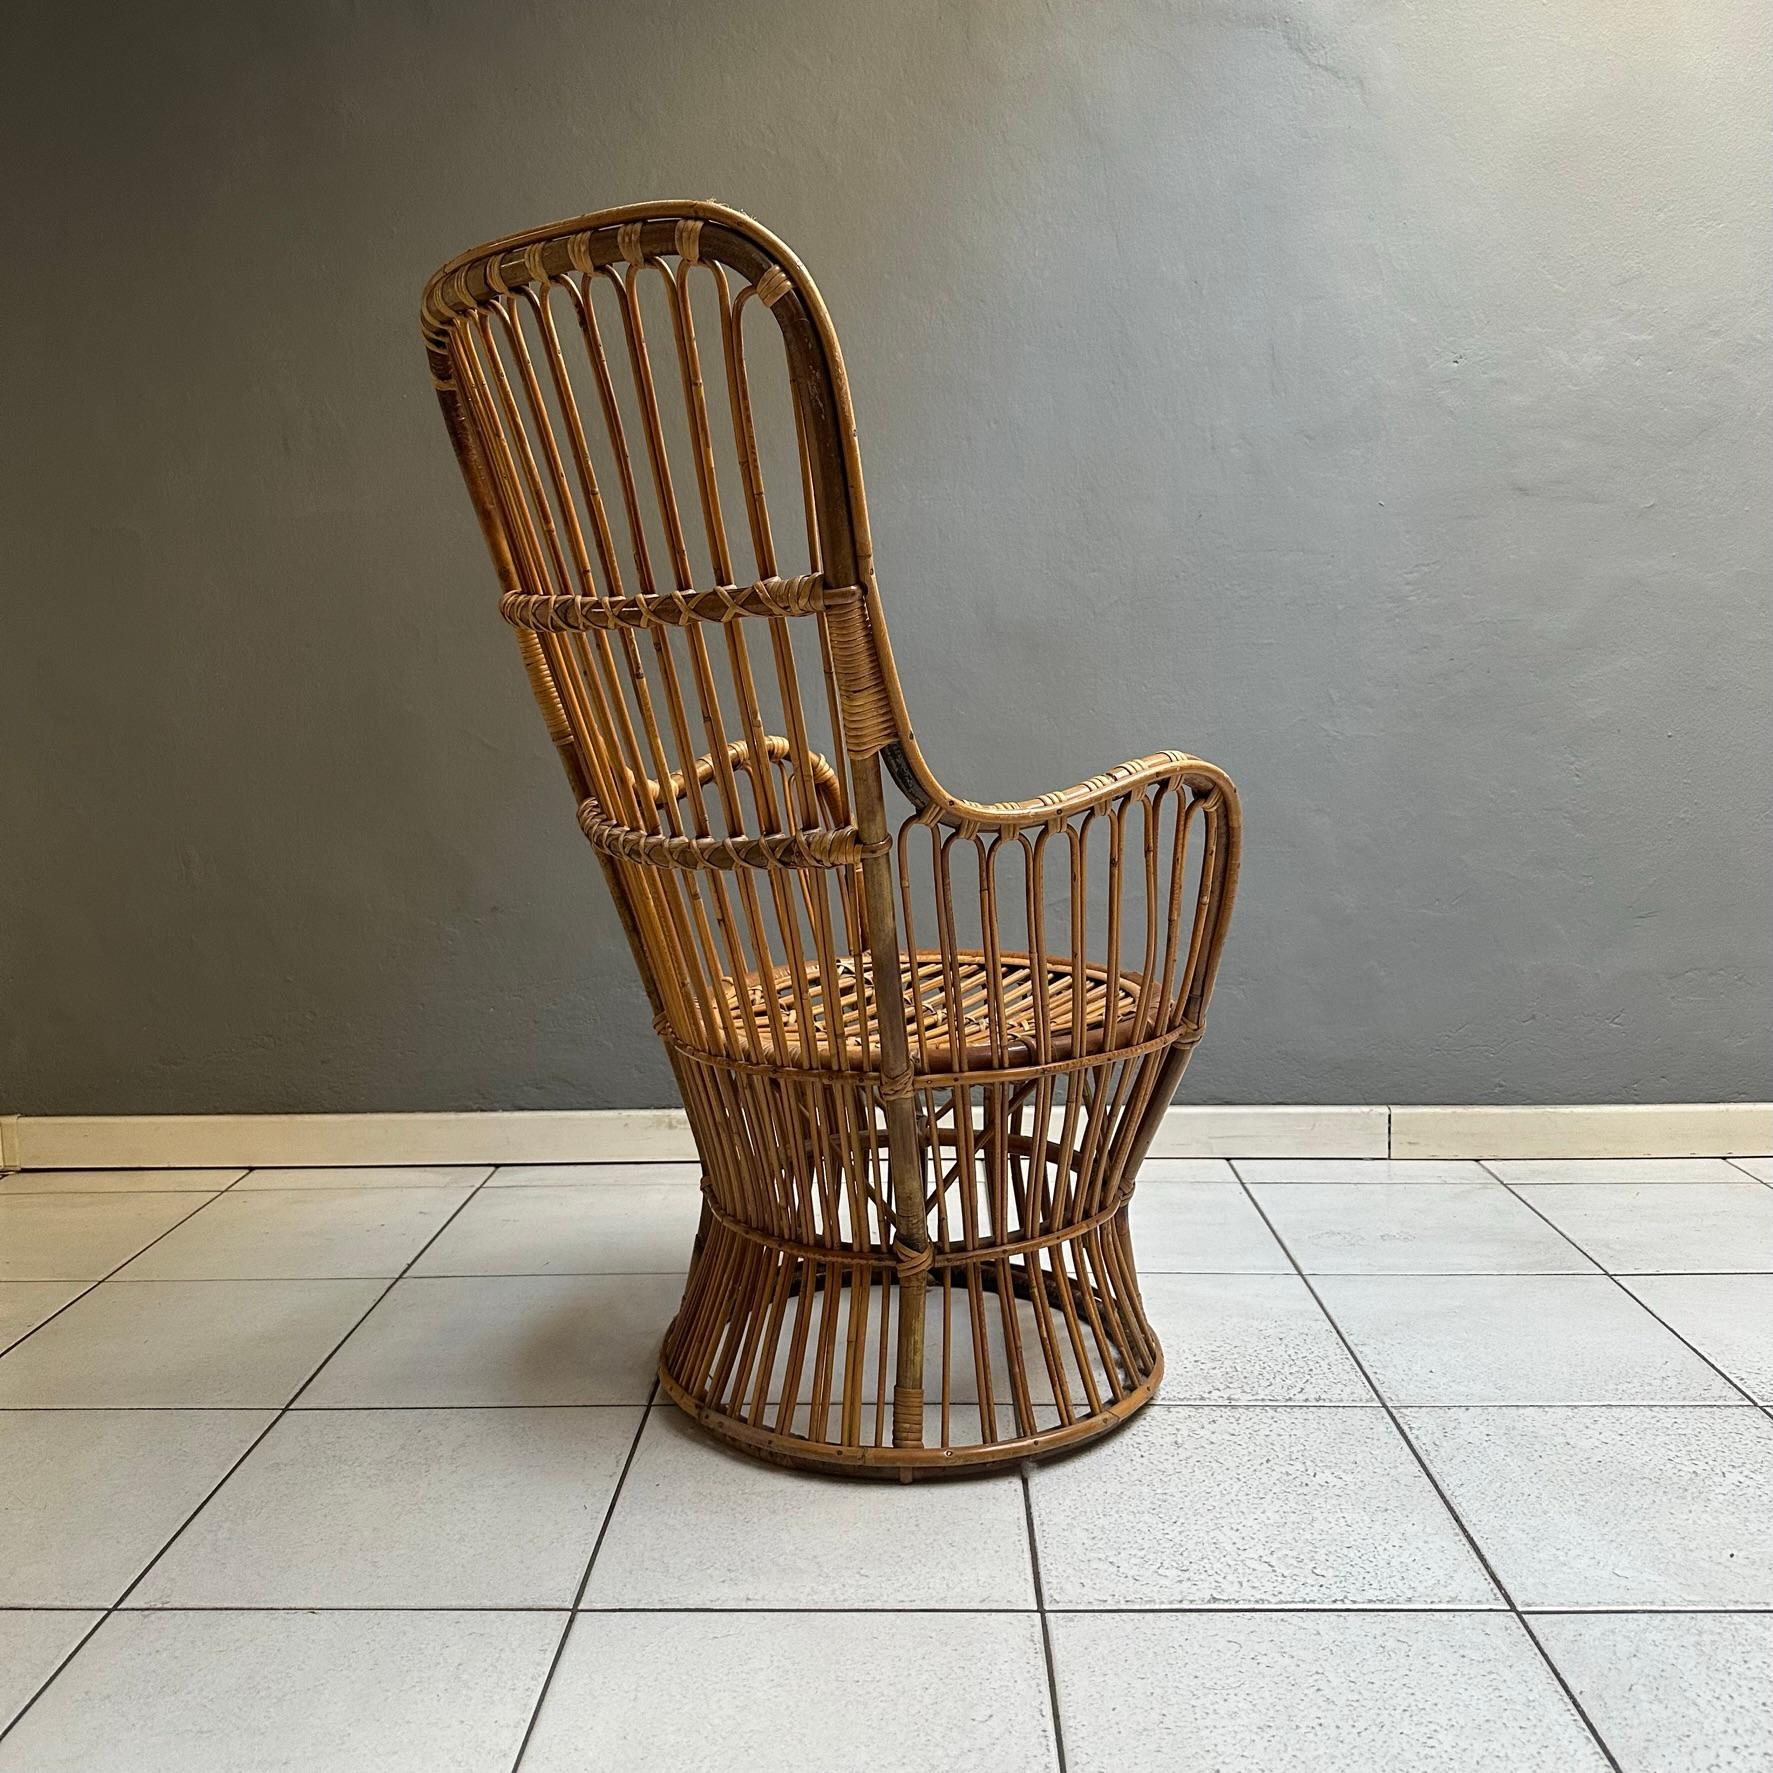 Wood Mid-Century Modern, Wicker armchair from the fifties, Italian manufacture For Sale